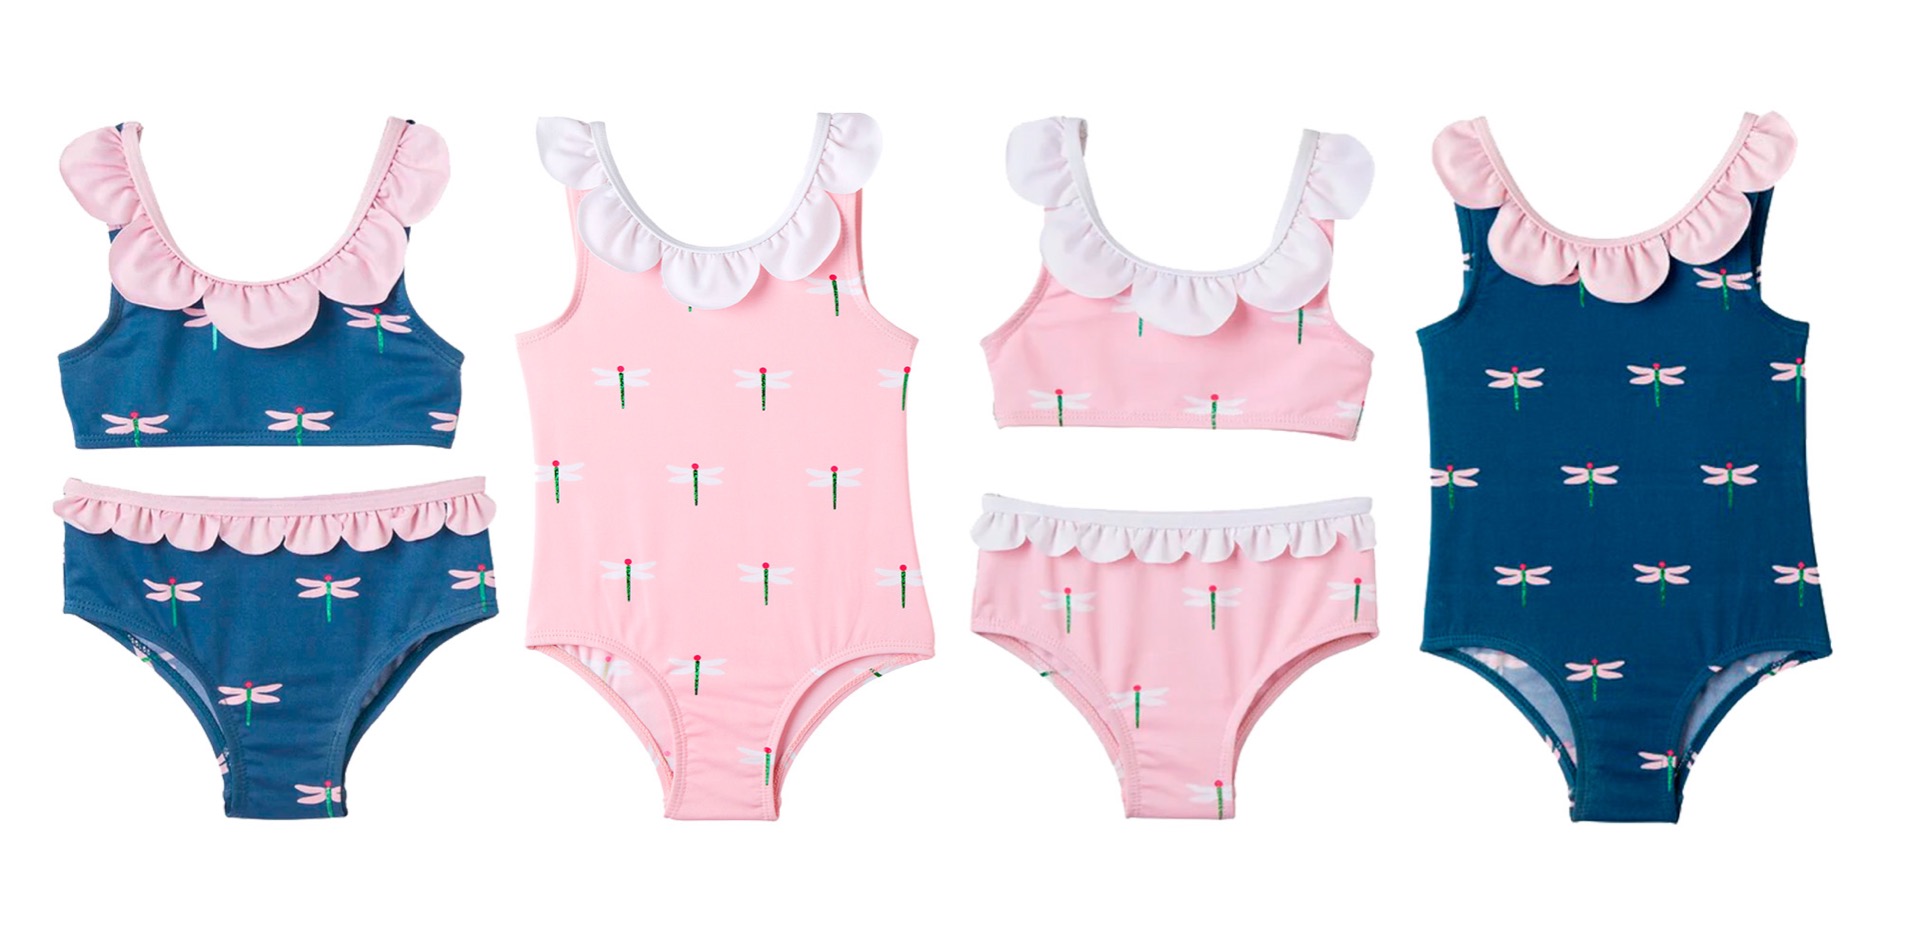 Toddler Girl's Fashion One-Piece & Two-Piece Swimsuits w/ Ruffle Details - Dragonfly Print - Sizes 2